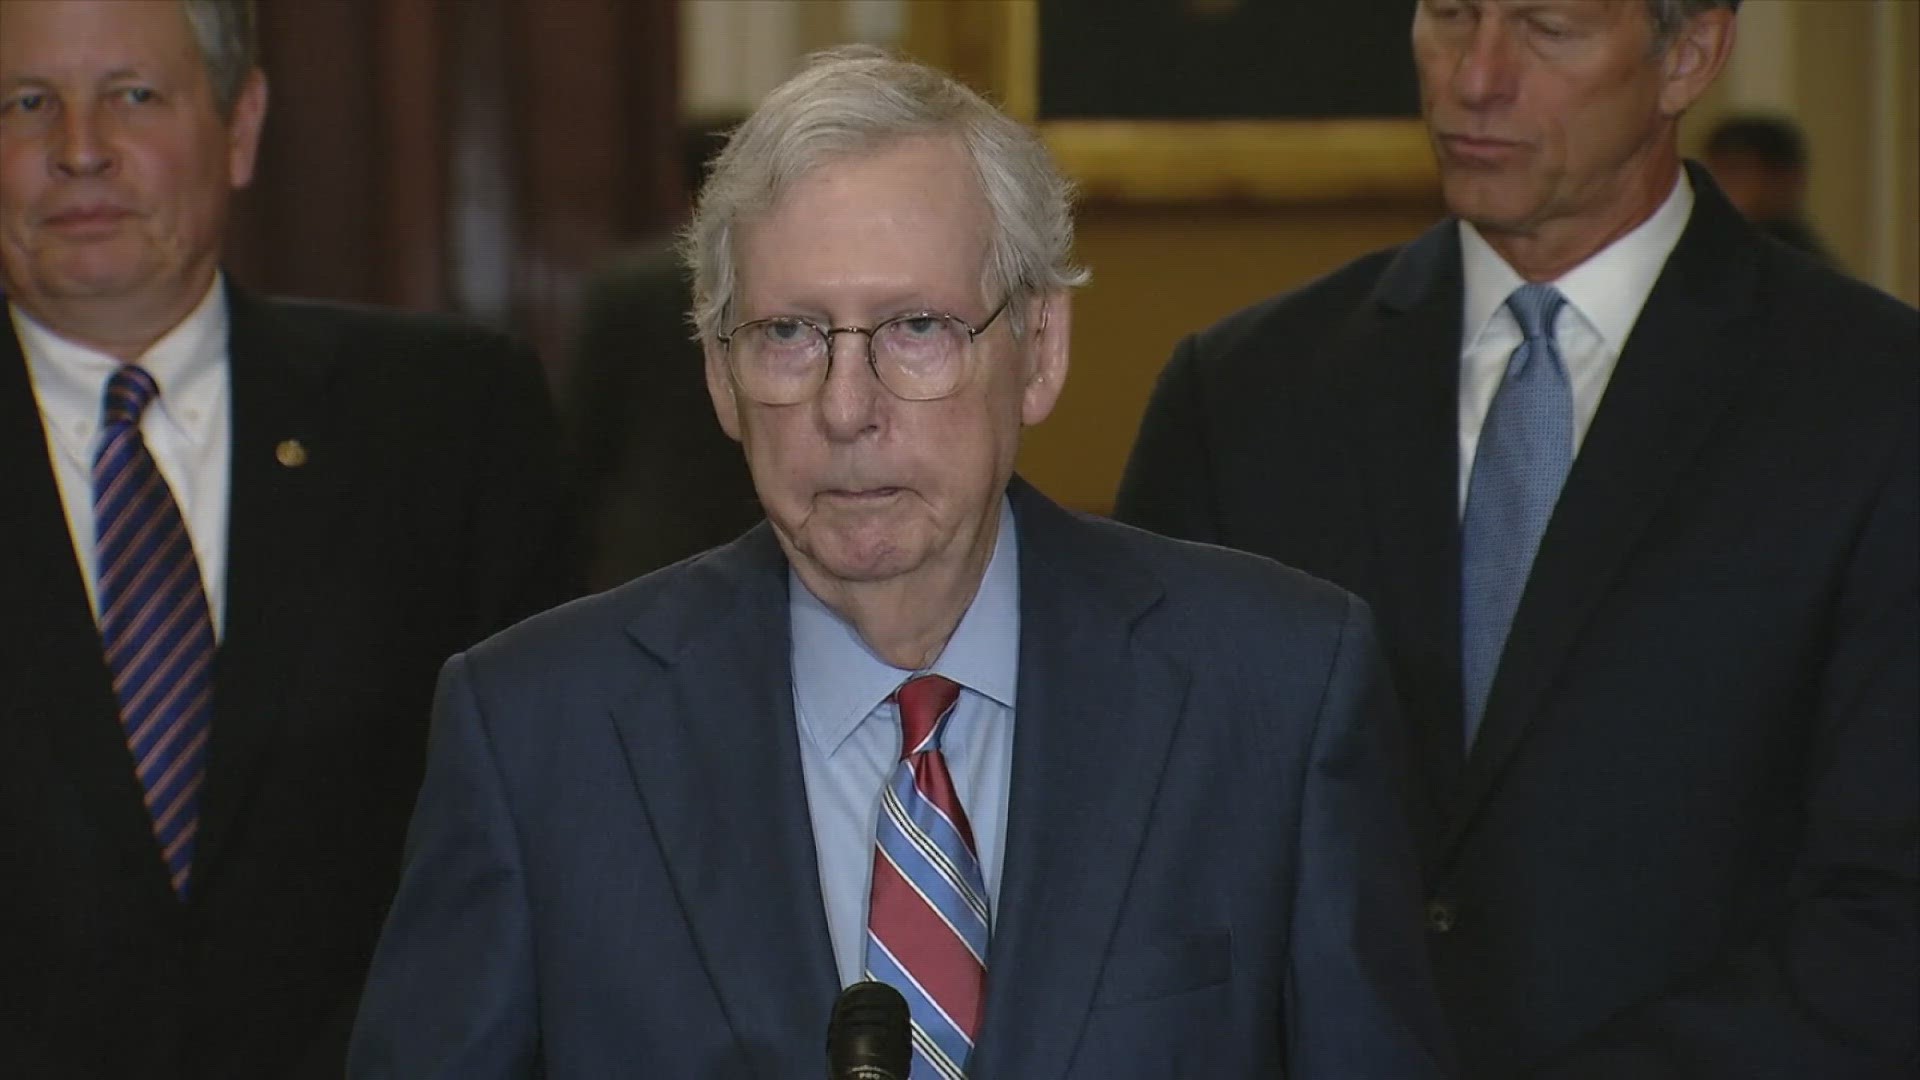 Mitch McConnell's health concerns, what happens if he retires?